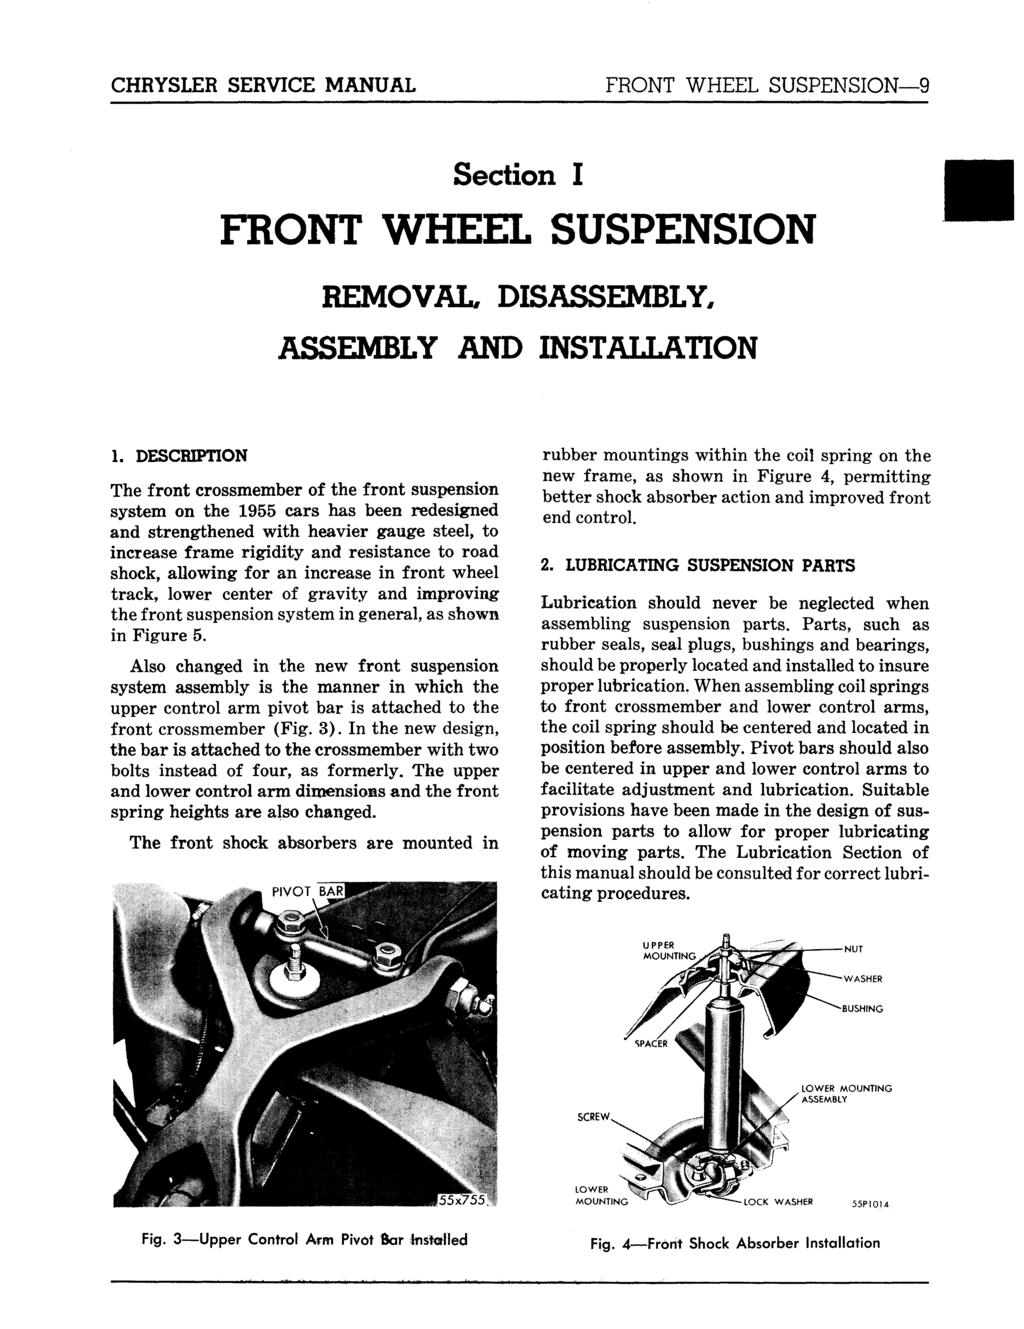 CHRYSLER SERVICE MANUAL FRONT WHEEL SUSPENSION 9 FRONT Section I SUSPENSION REMOVAL DISASSEMBLY, ASSEMBLY AND INSTALLATION 1.